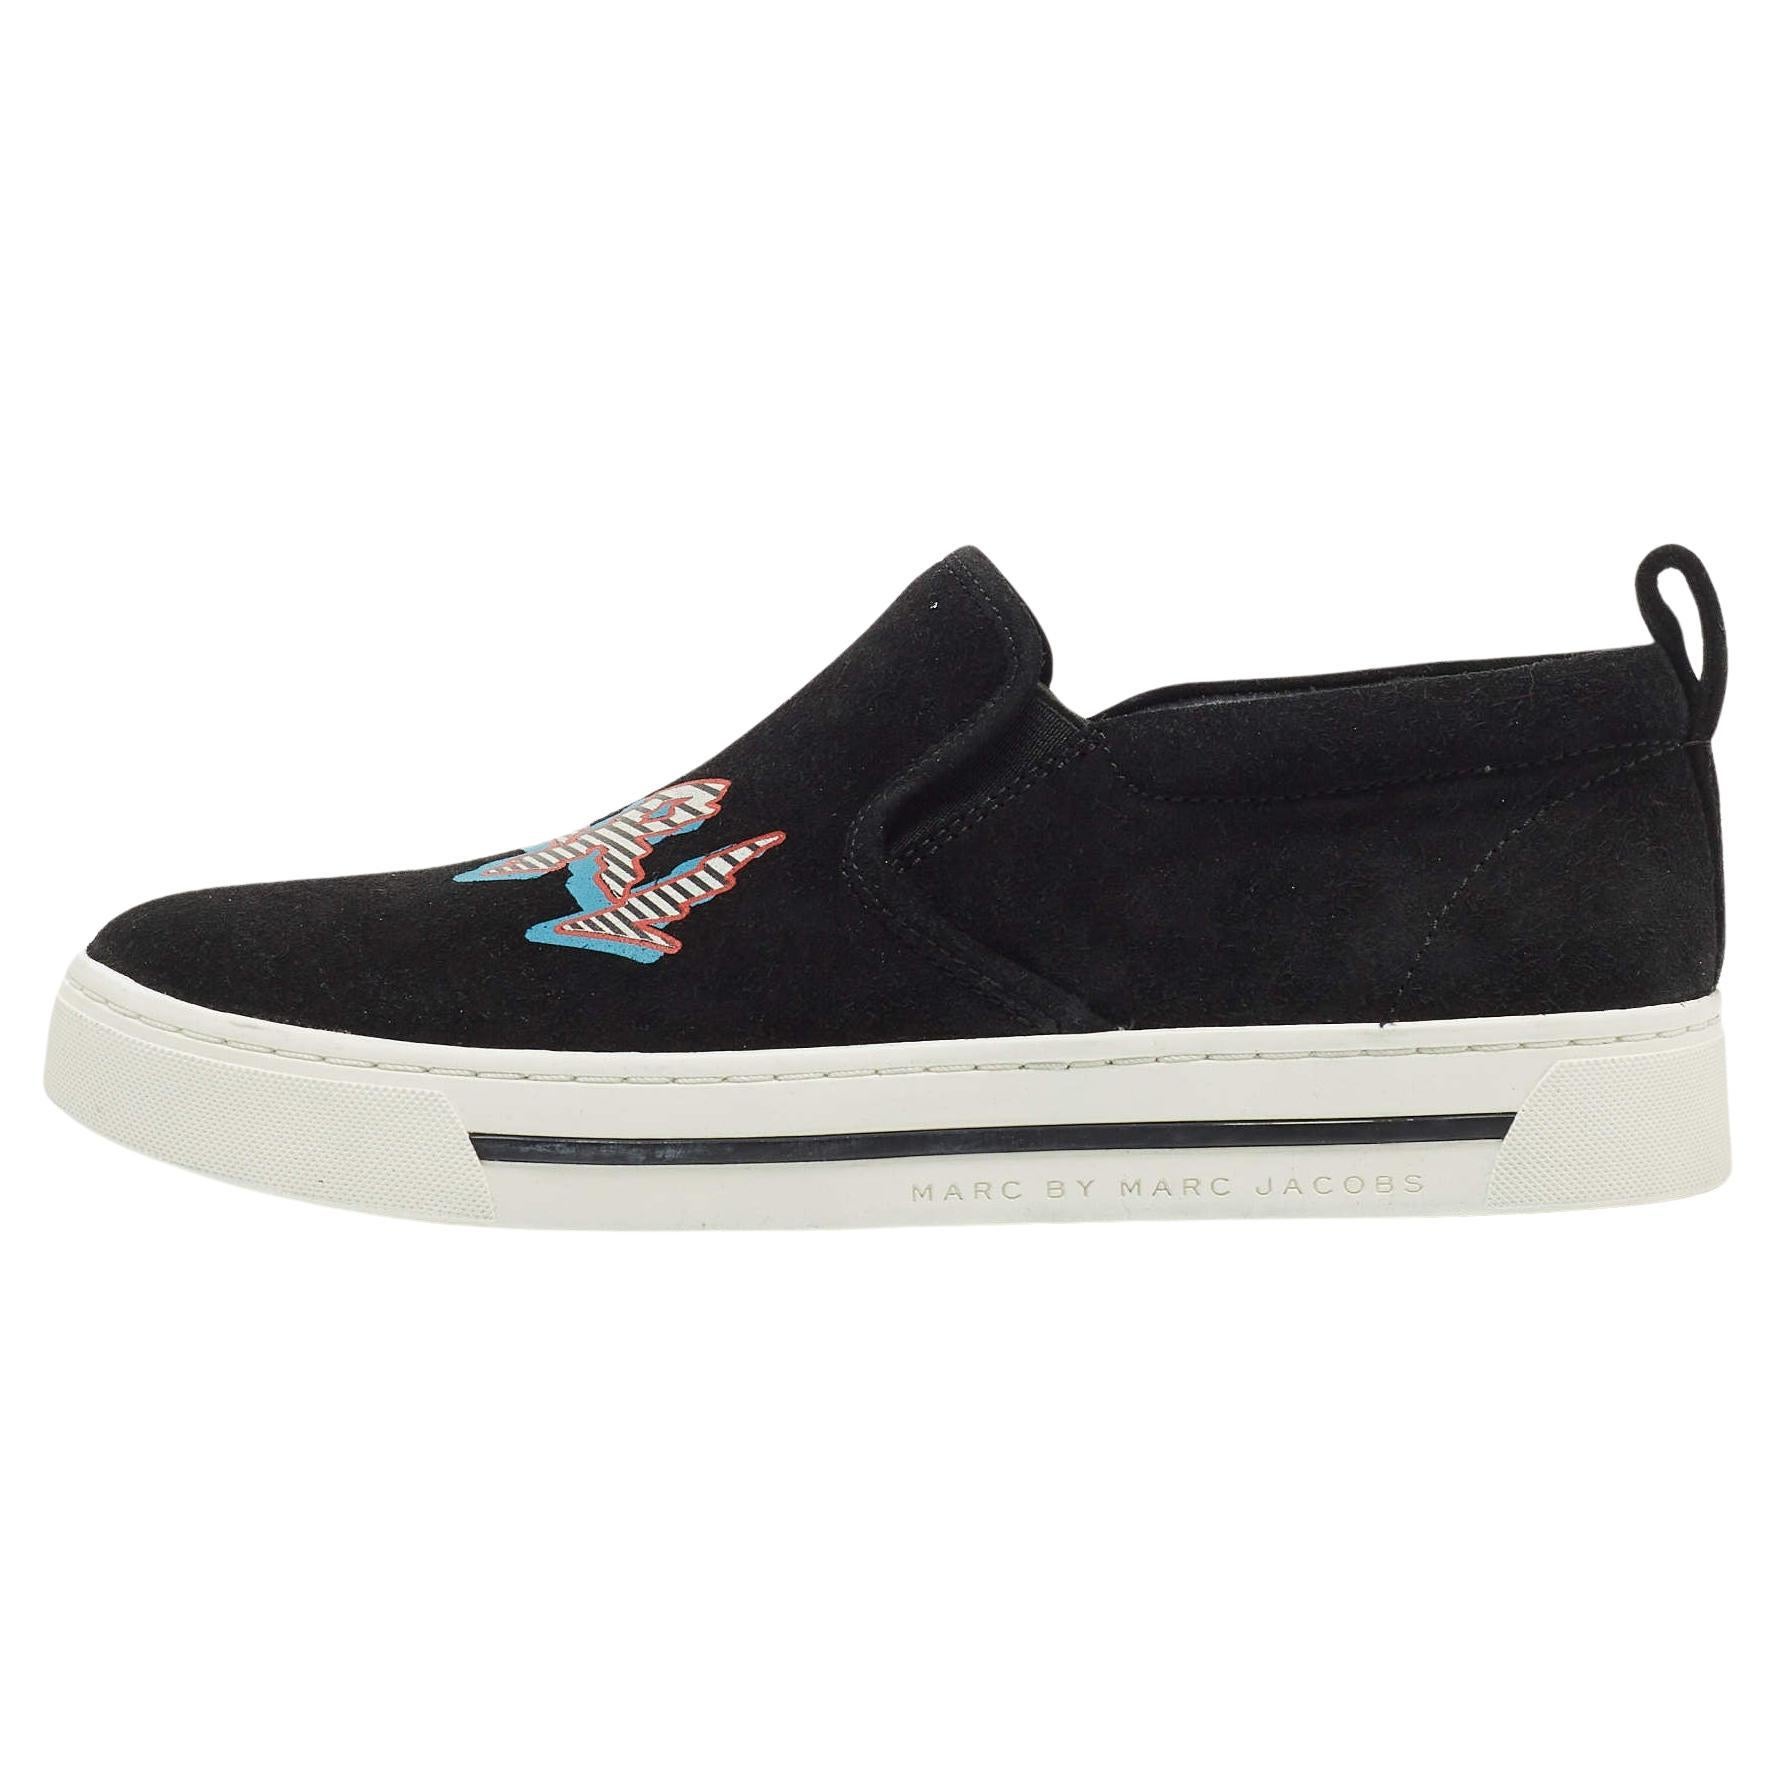 Marc By Marc Jacobs Black Suede GRRL Slip On Sneakers Size 37 For Sale